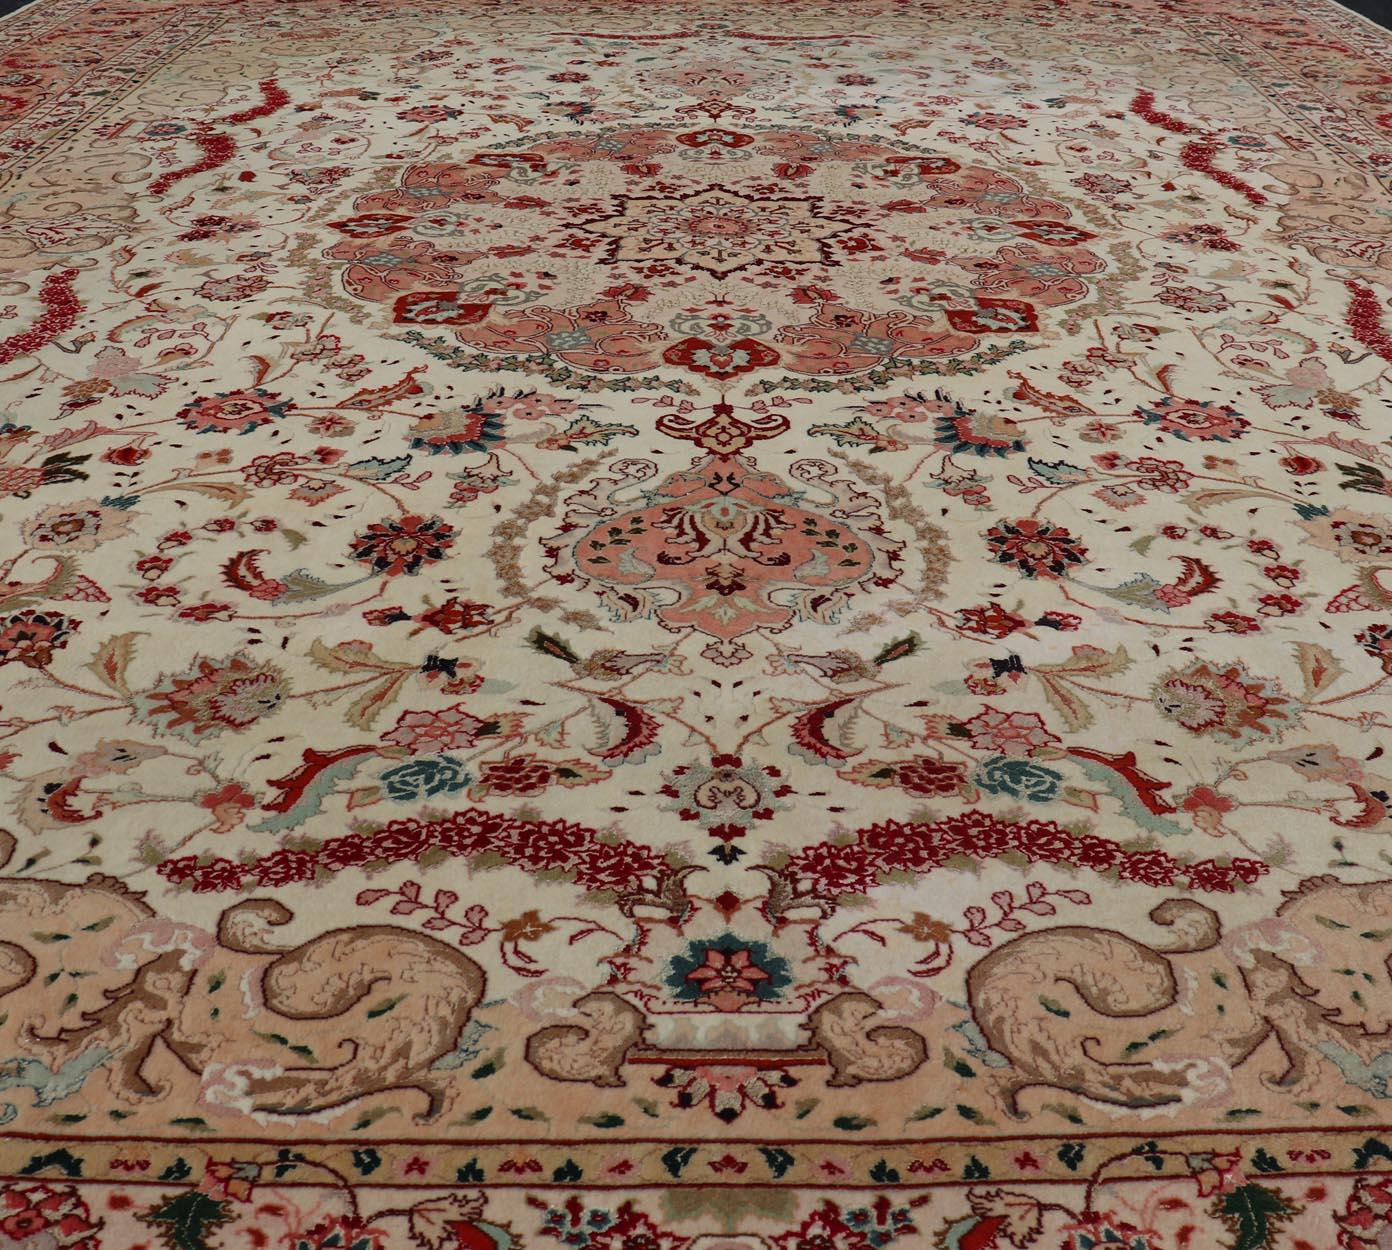  Vintage Persian Fine Tabriz Rug with Floral Medallion Design in Wool And Silk. Colorful Tabriz vintage rug from Persia with elegant medallion floral design, rug X23-0601-A, country of origin / type: Iran / Tabriz, circa 1950
Measures: 9'10 x 13'0